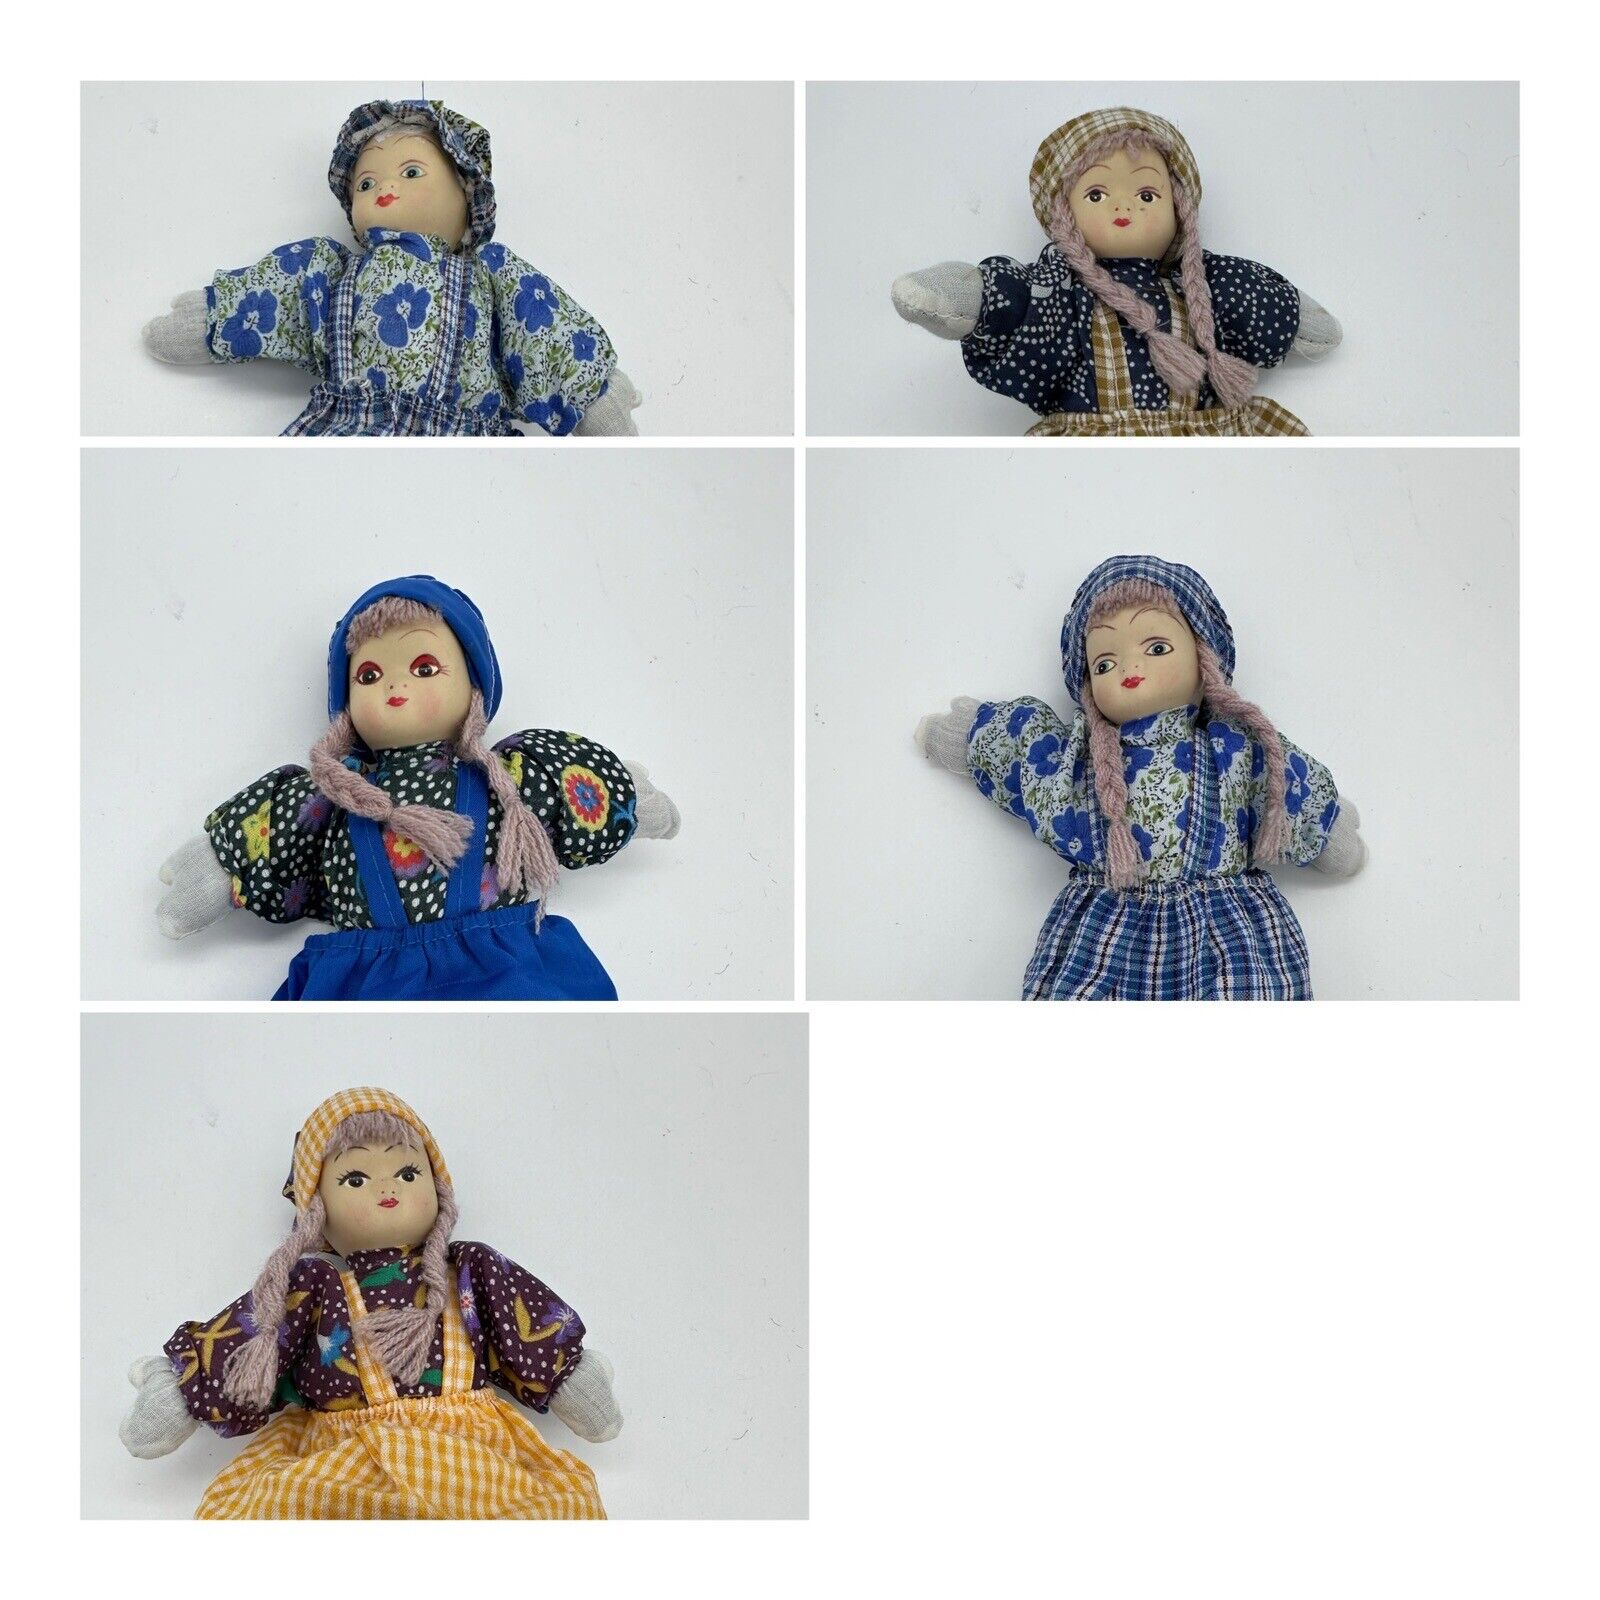 5 Rare Old German style Dolls With Beautiful Porcelain Faces Cloth/Sand Body